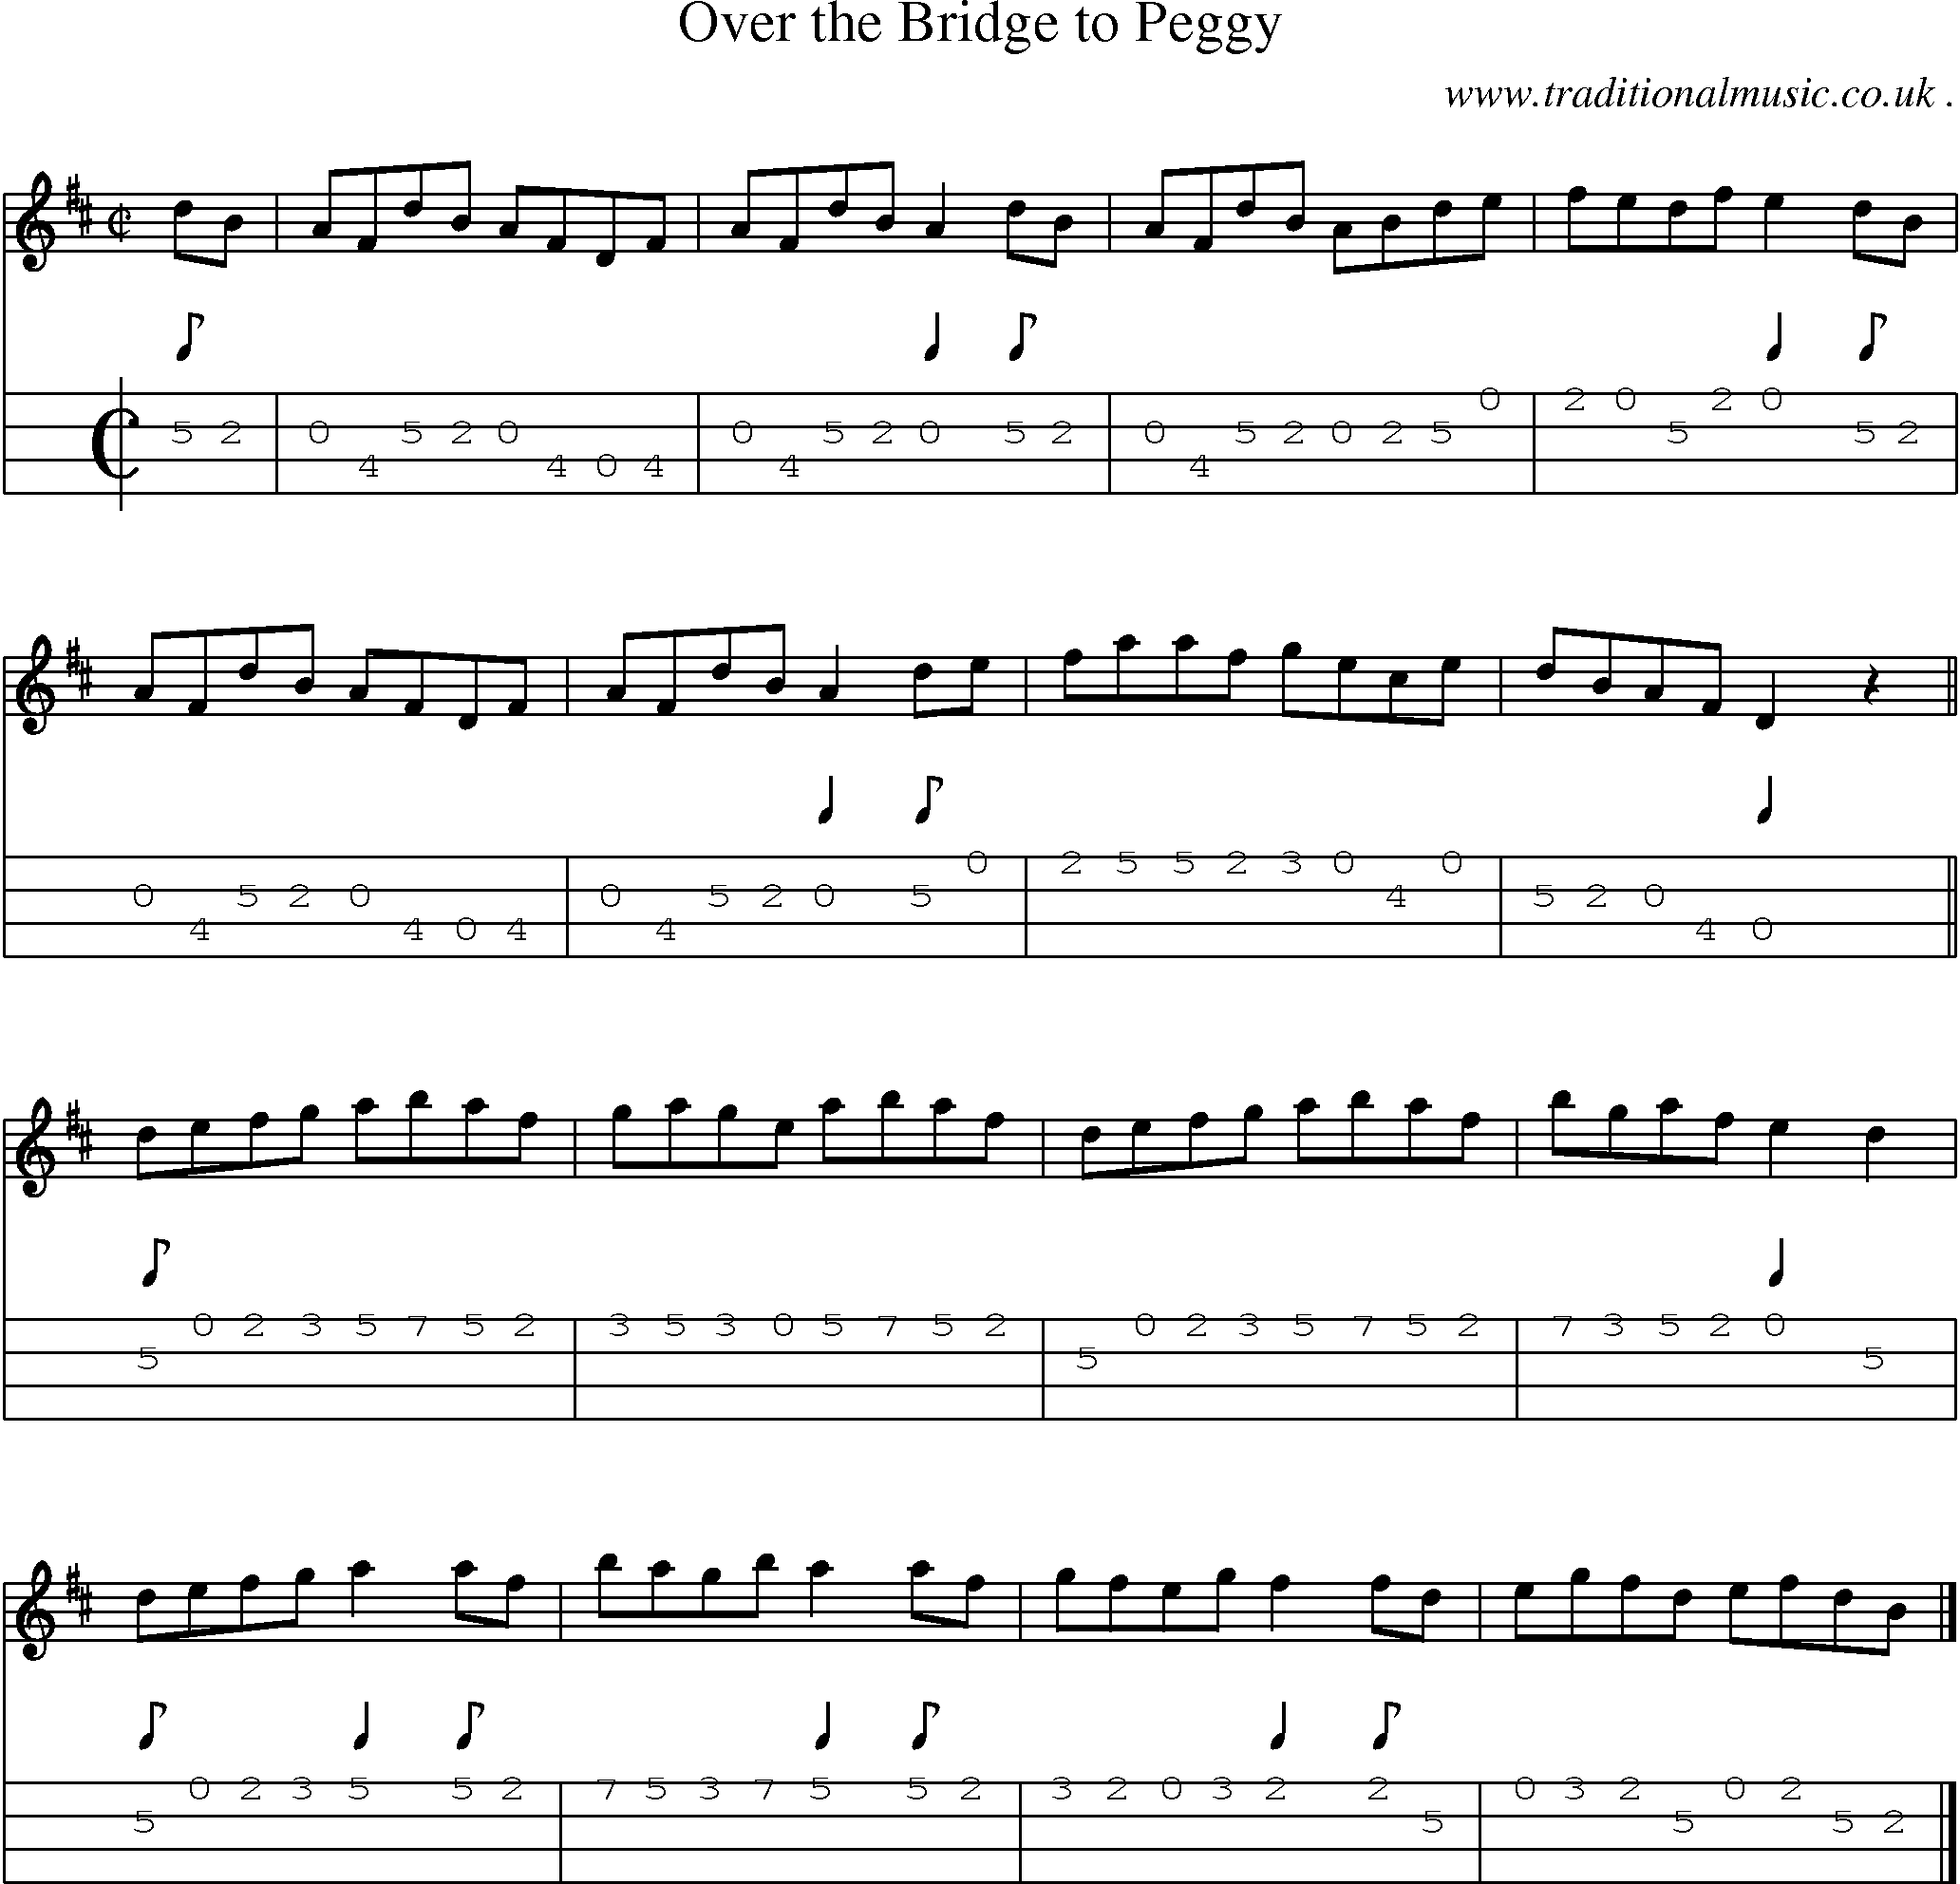 Sheet-music  score, Chords and Mandolin Tabs for Over The Bridge To Peggy